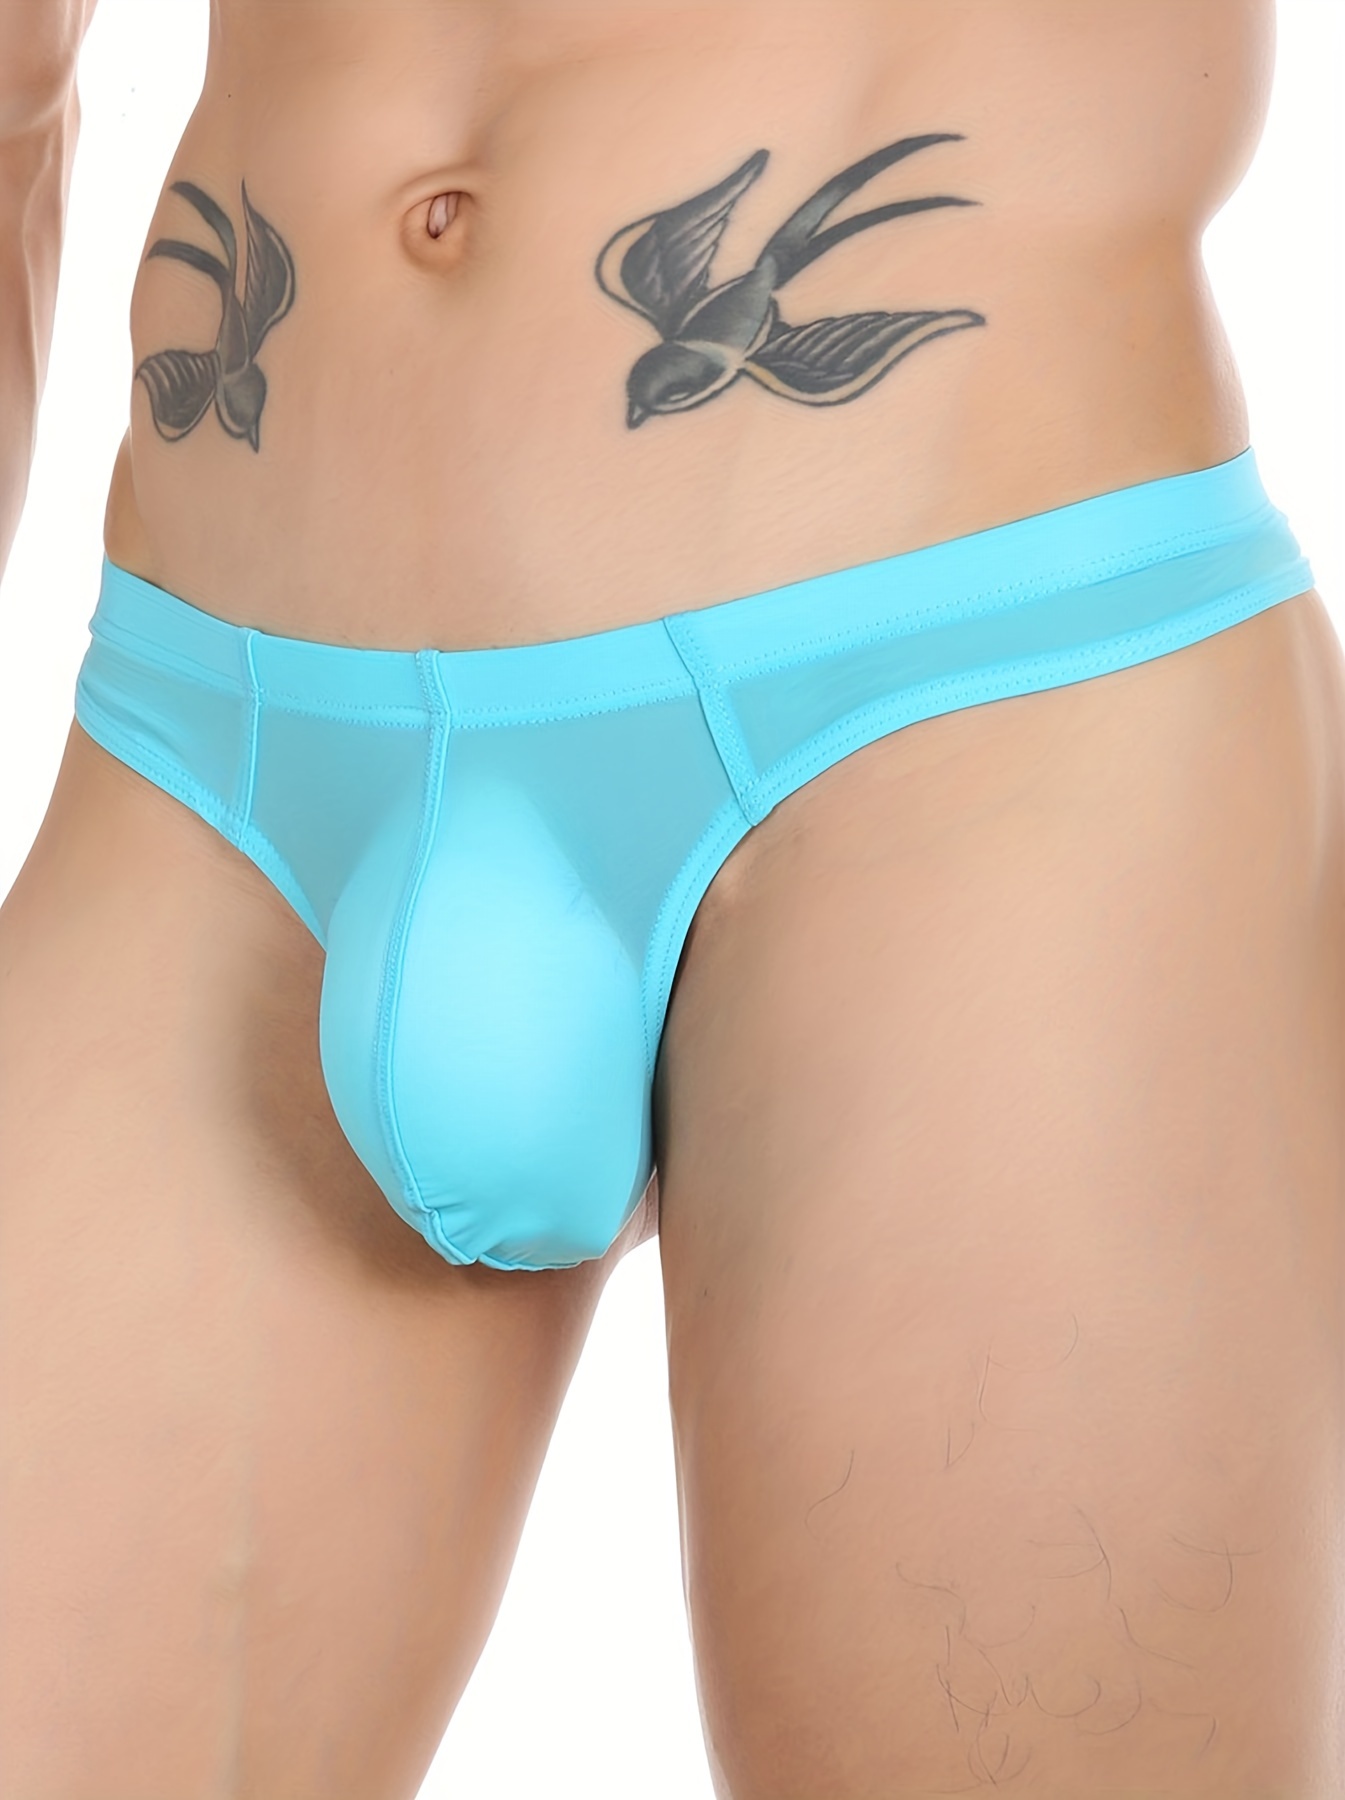 Sheer Thong Briefs for Men - Sexy See-Through Bikini Underwear with T-Back  G-String